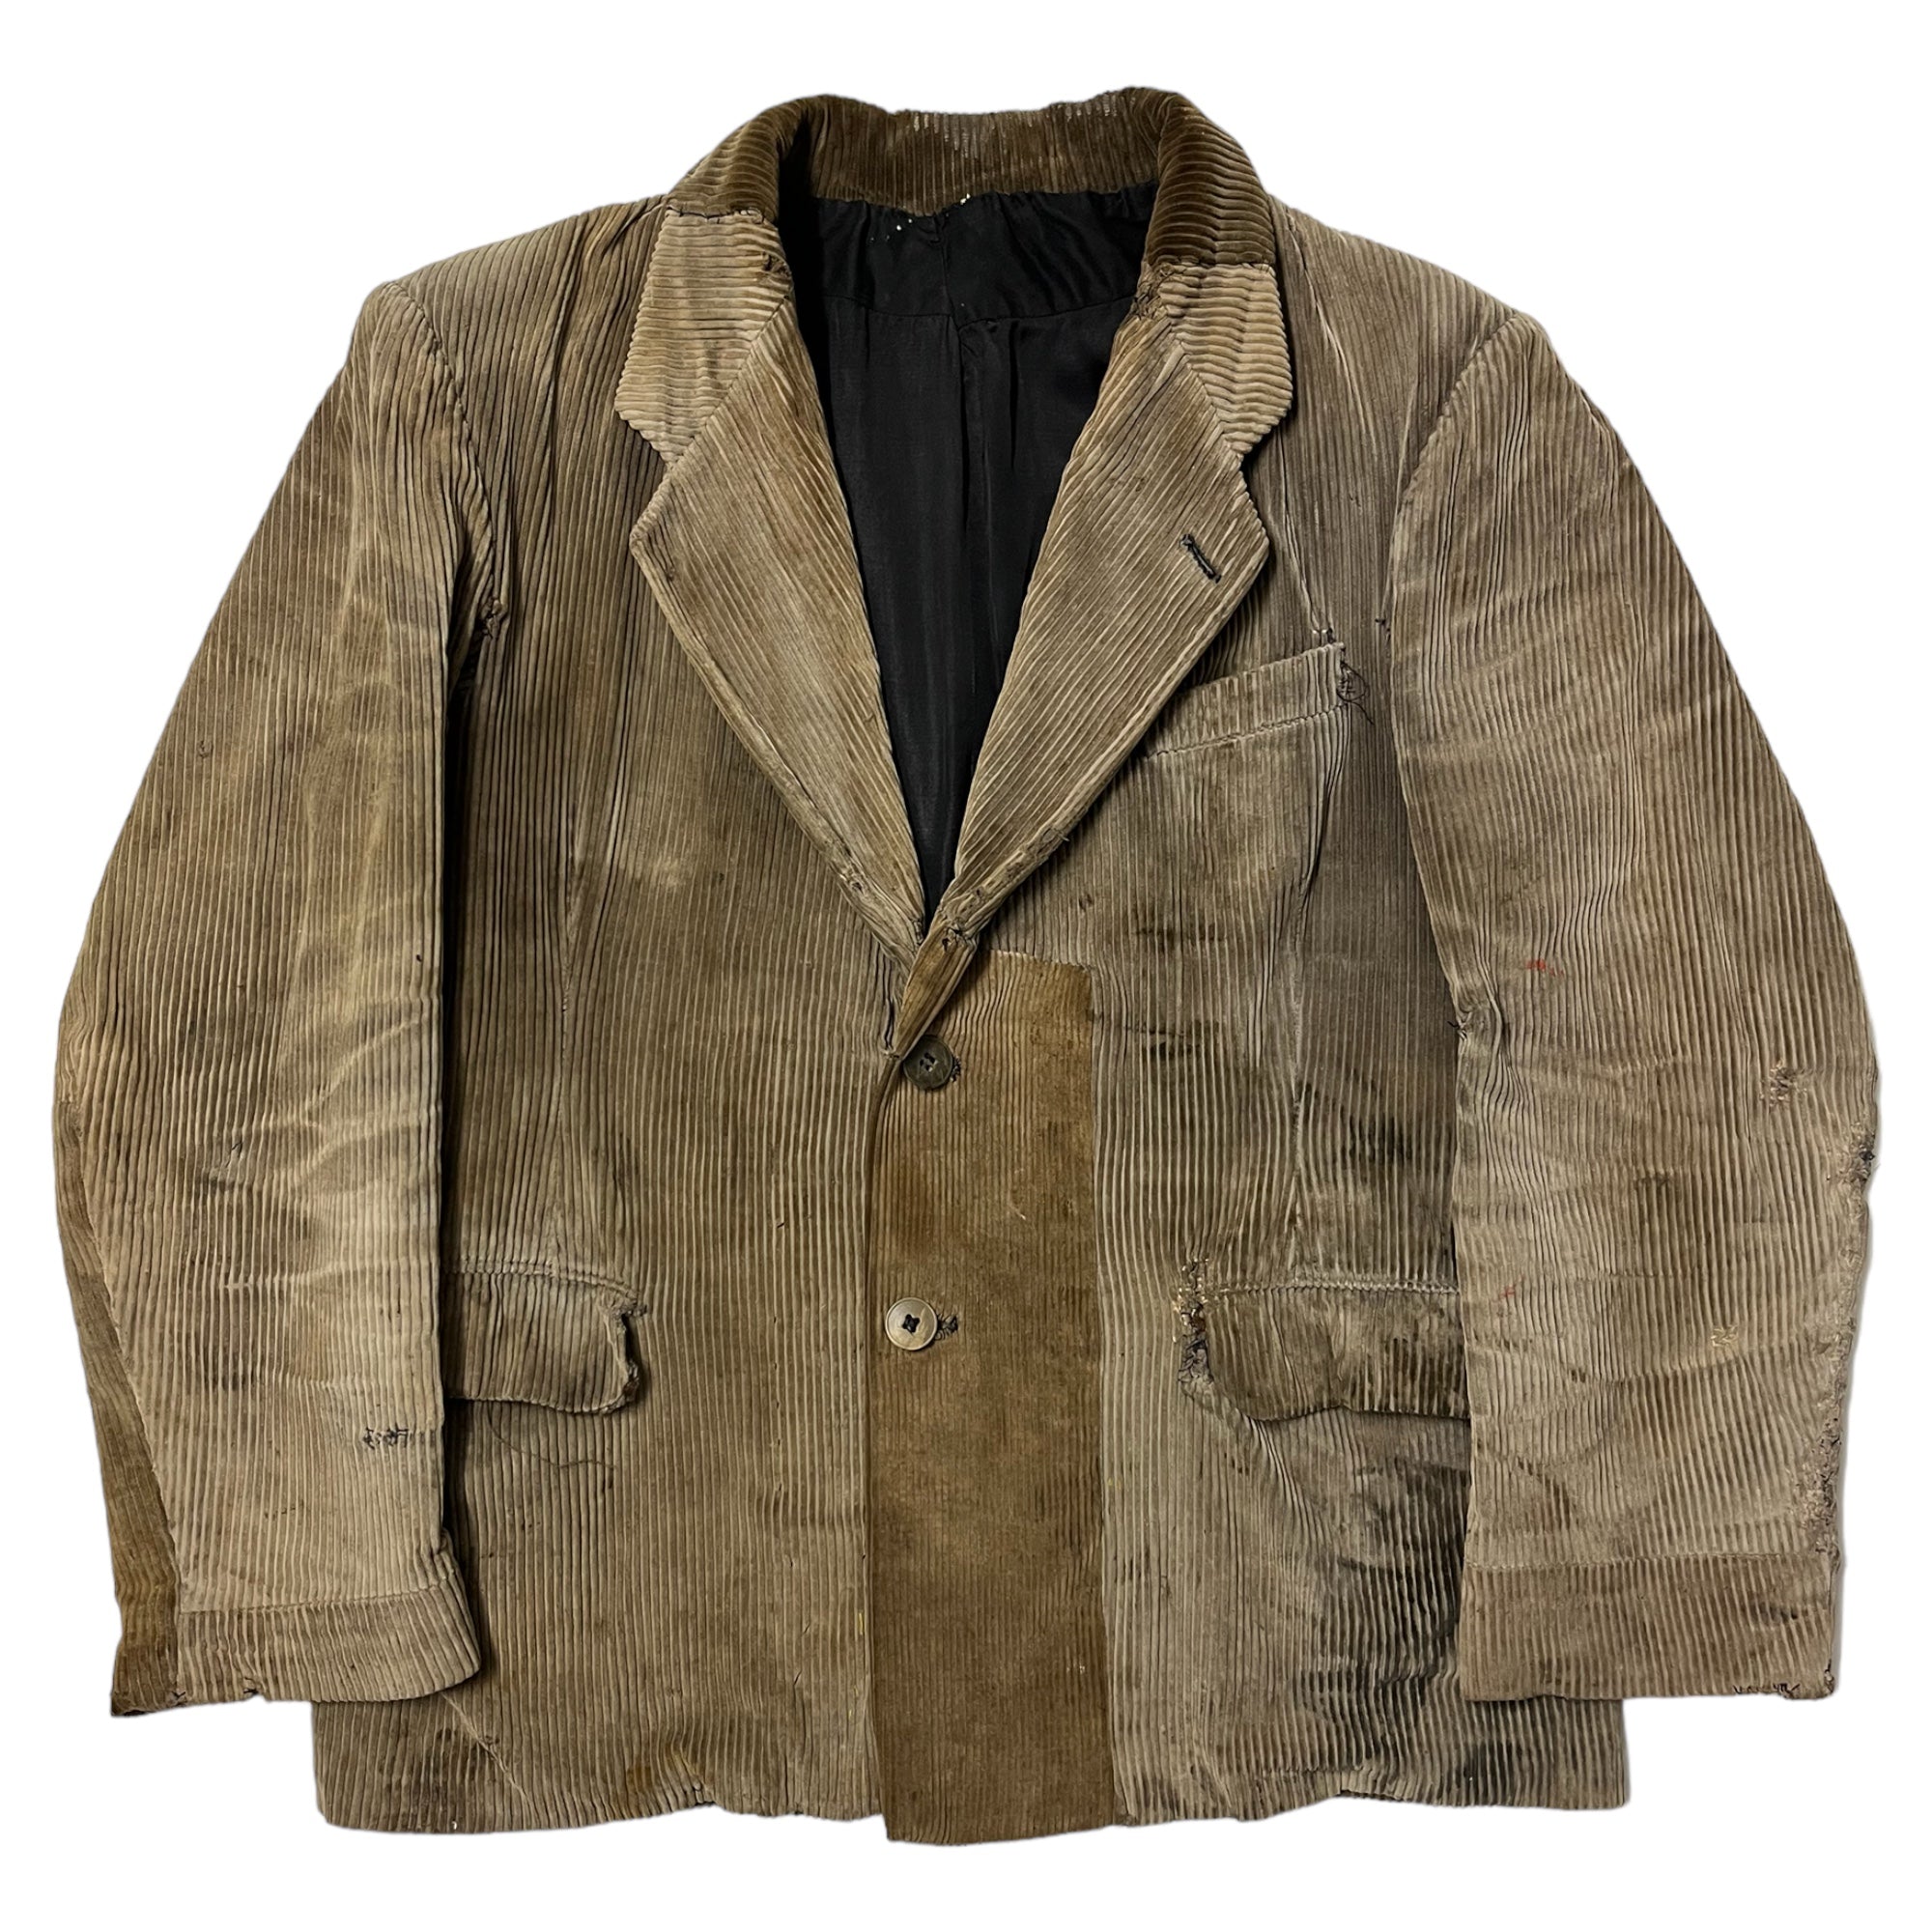 1930s French Corduroy Distressed & Repaired Blazer - Tan/Brown - M/L